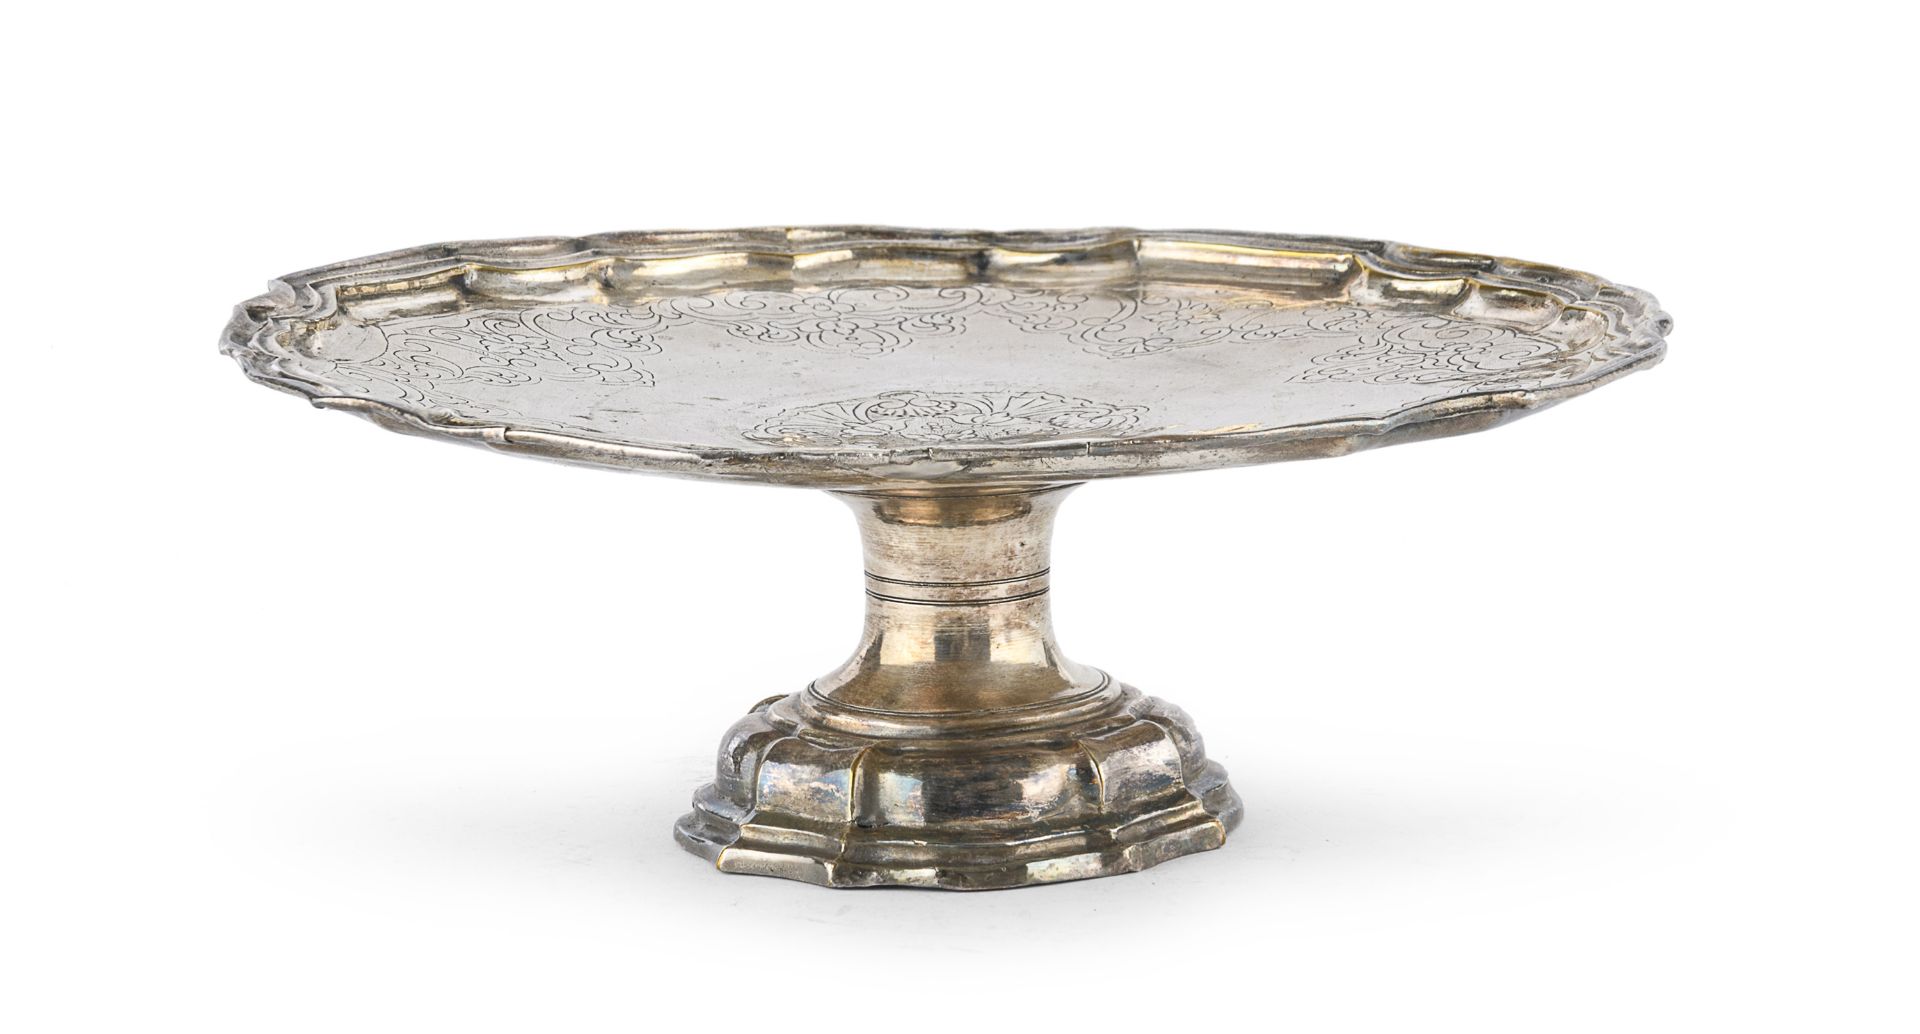 SILVER STAND 18TH CENTURY